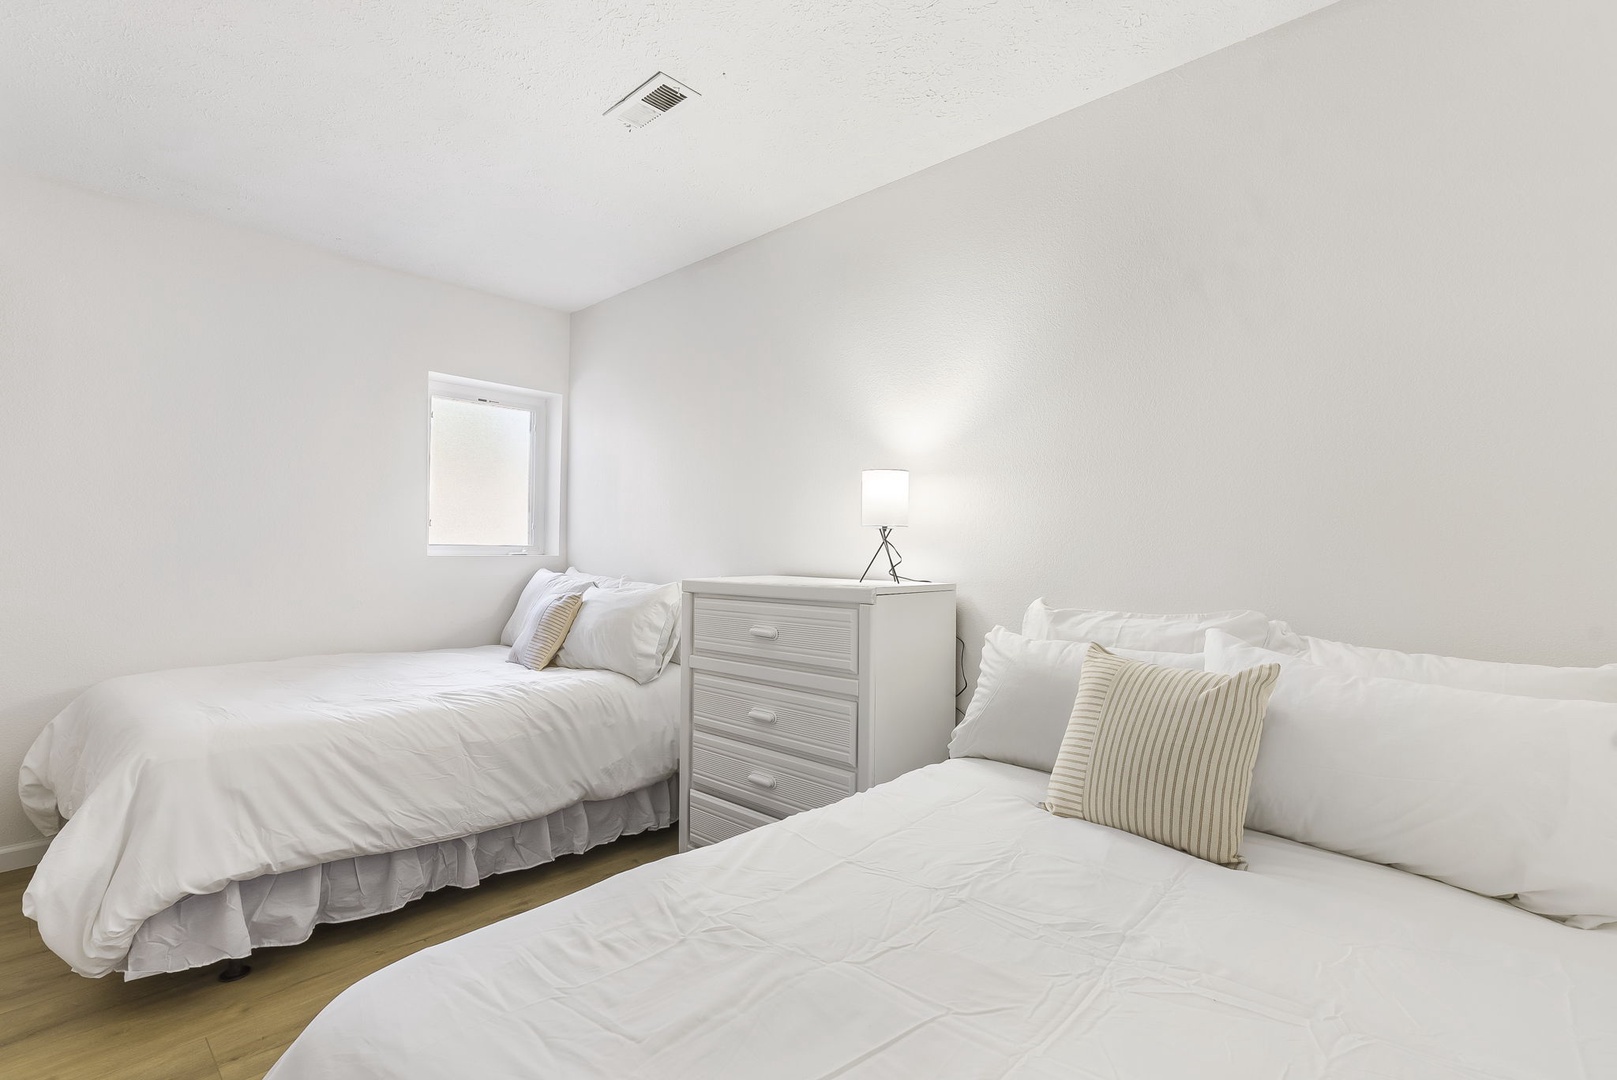 Unit 43: This 1st floor bedroom includes a pair of cozy full-sized beds